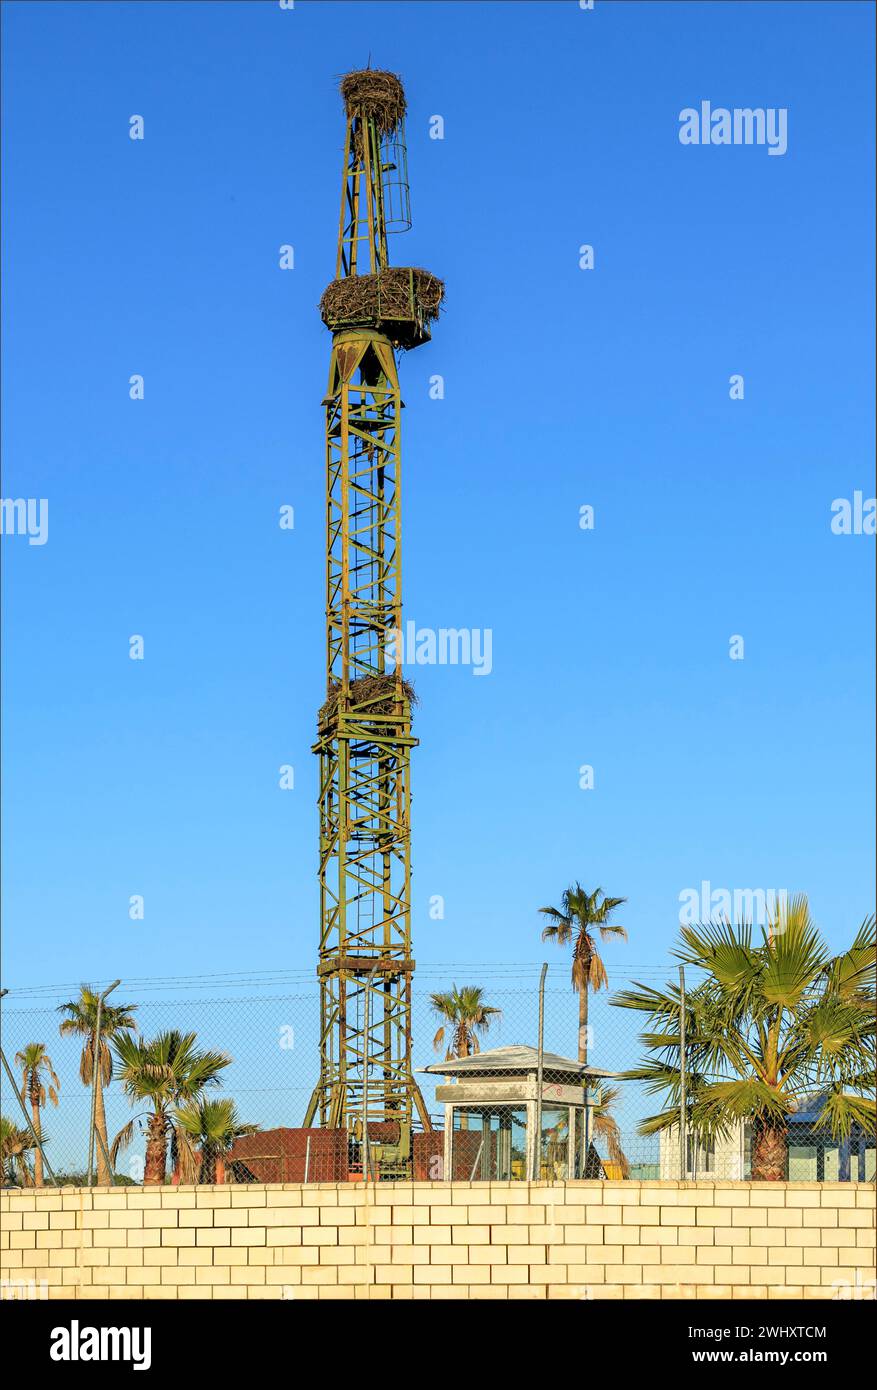 Green painted metal tower with storks nests and palm trees against a blue sky Stock Photo